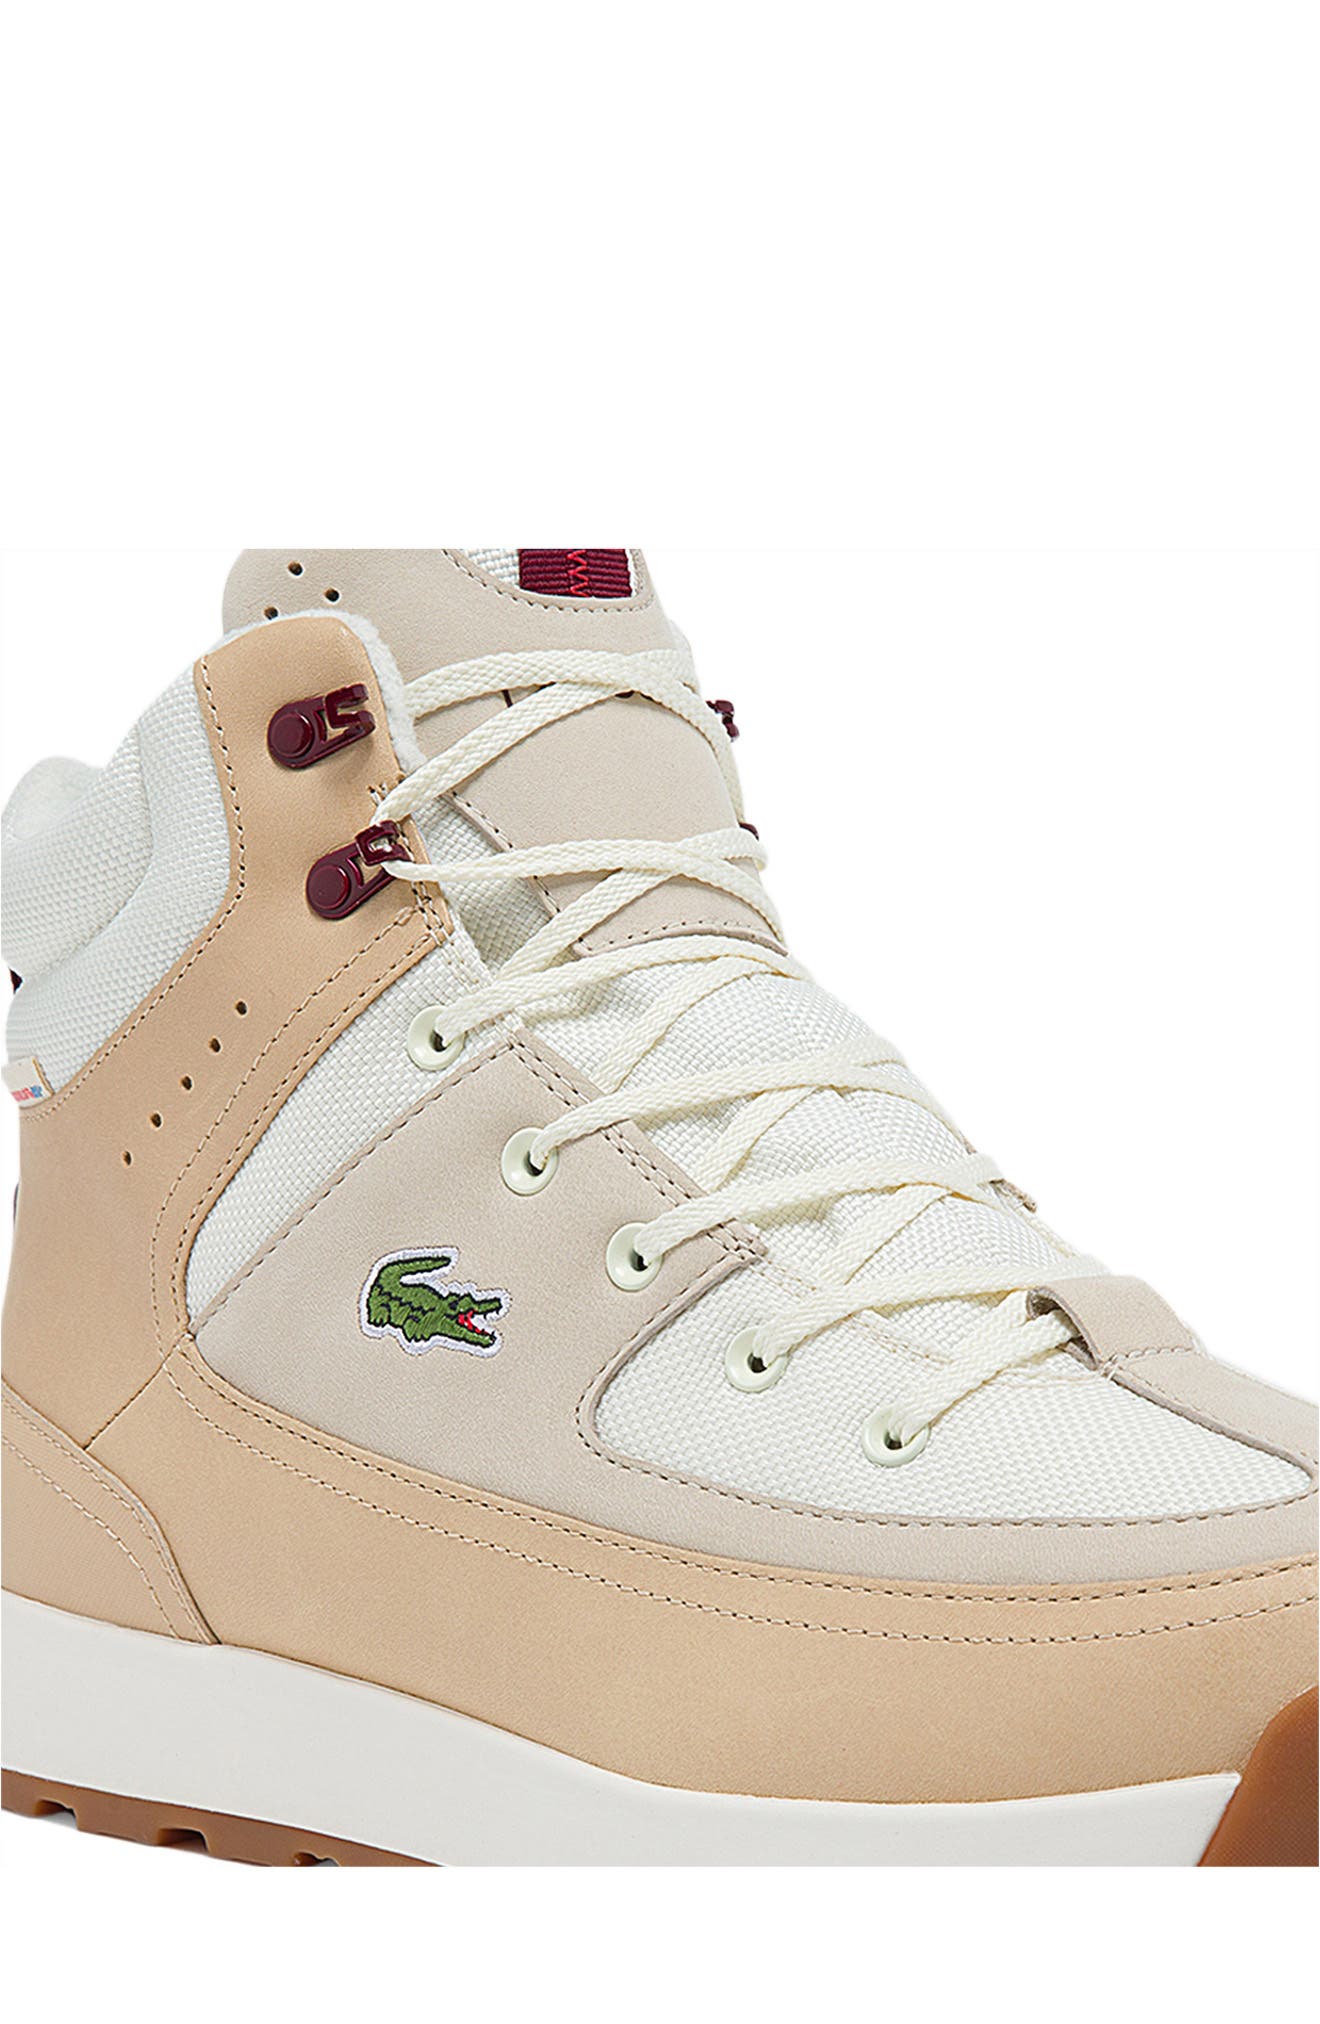 lacoste shoes nordstrom